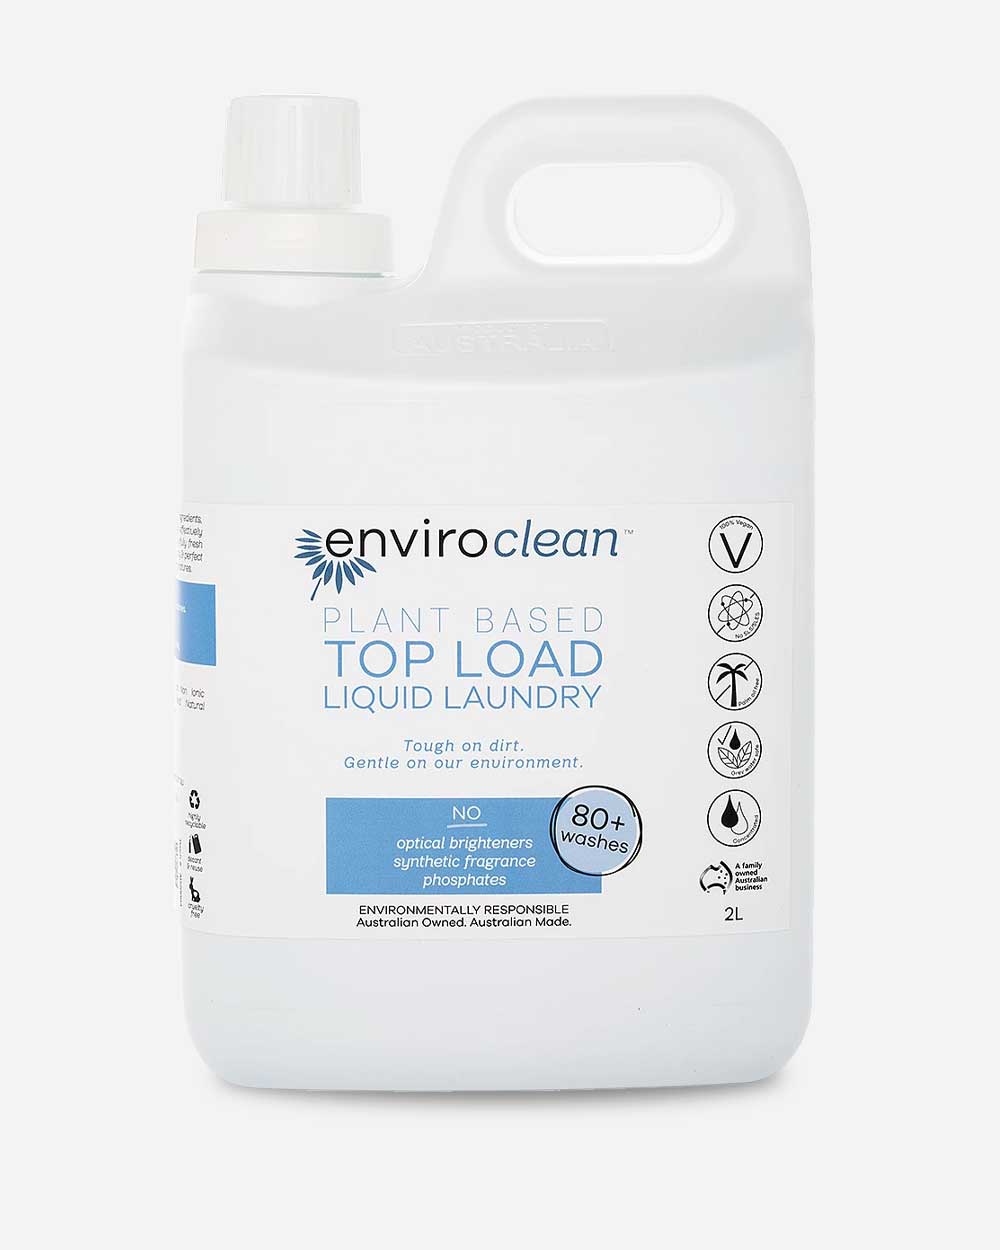 Laundry Liquid (Top Loader) from Enviroclean